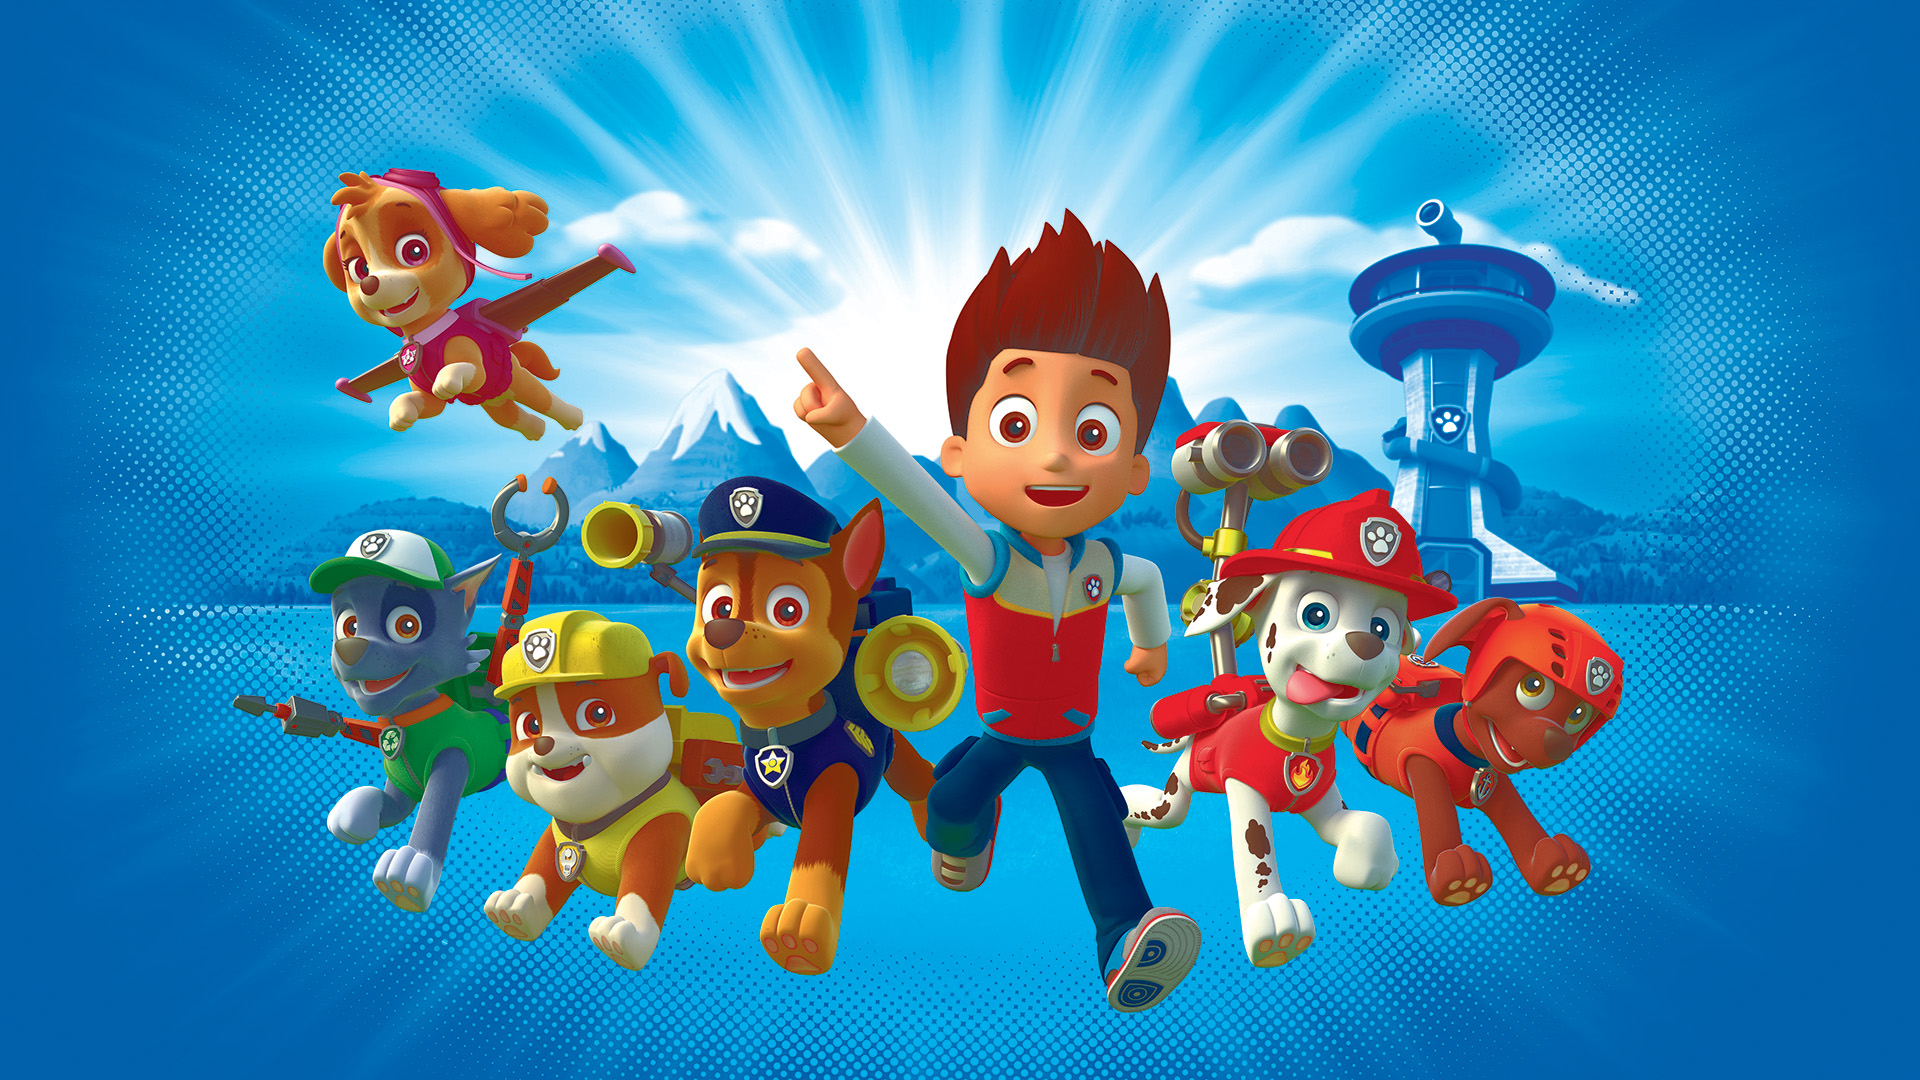 Paw Patrol wallpapers for desktop, download free Paw Patrol pictures and  backgrounds for PC | mob.org